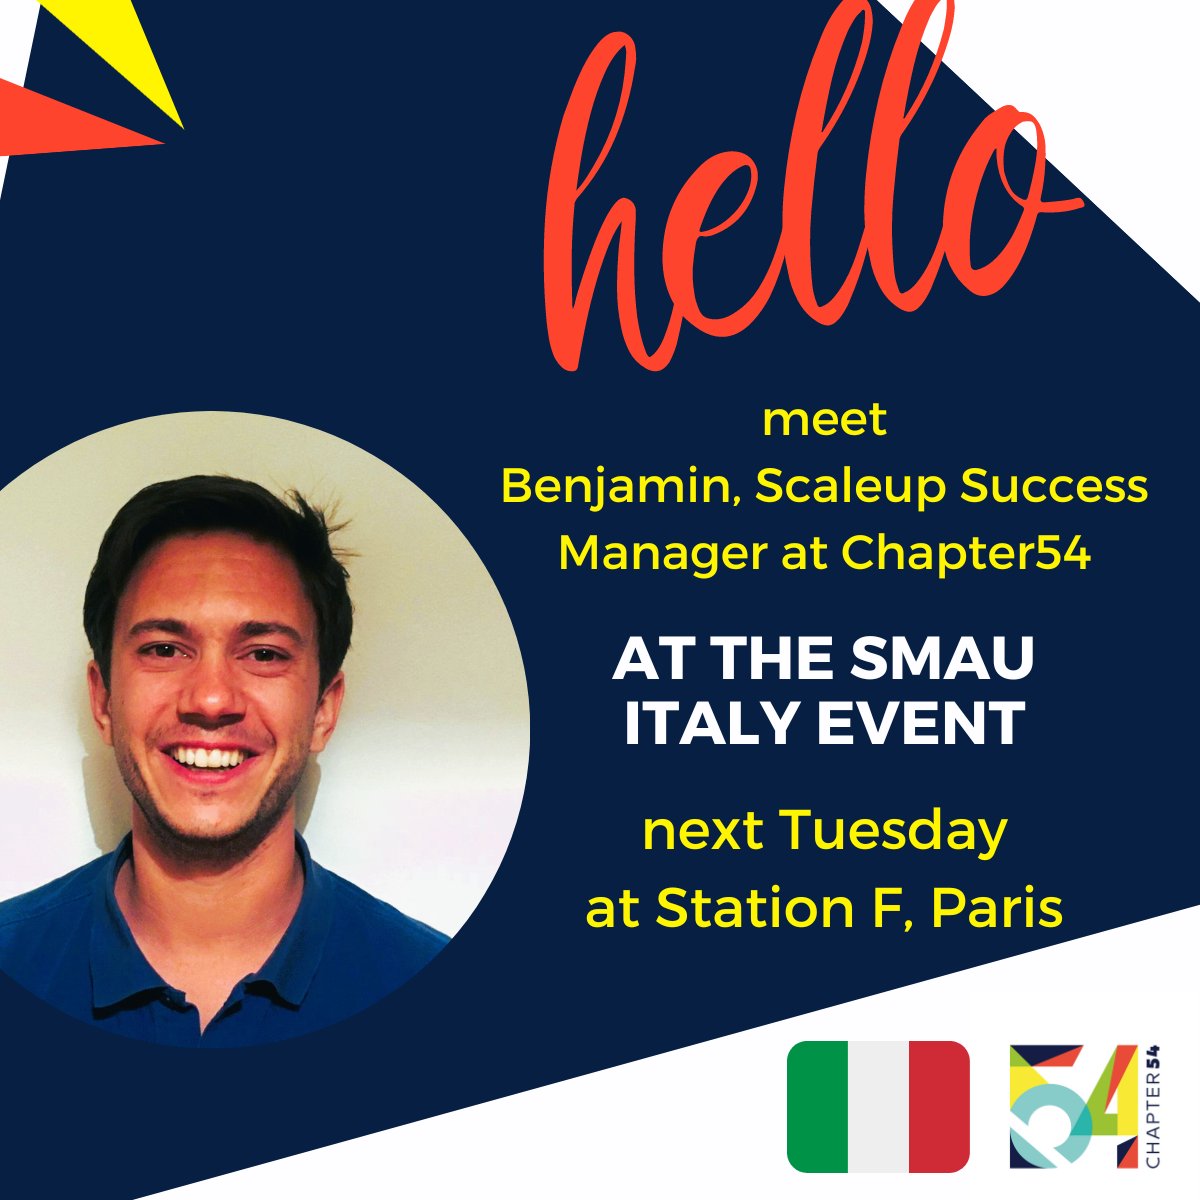 Are you in Paris? Meet the team! Ben will be attending SMAU Paris at @joinstationf on the 16th of April. This event, organized in collaboration with the ITA, aims at providing a firsthand look at the flourishing Italian innovation scenes across various. (1/3)